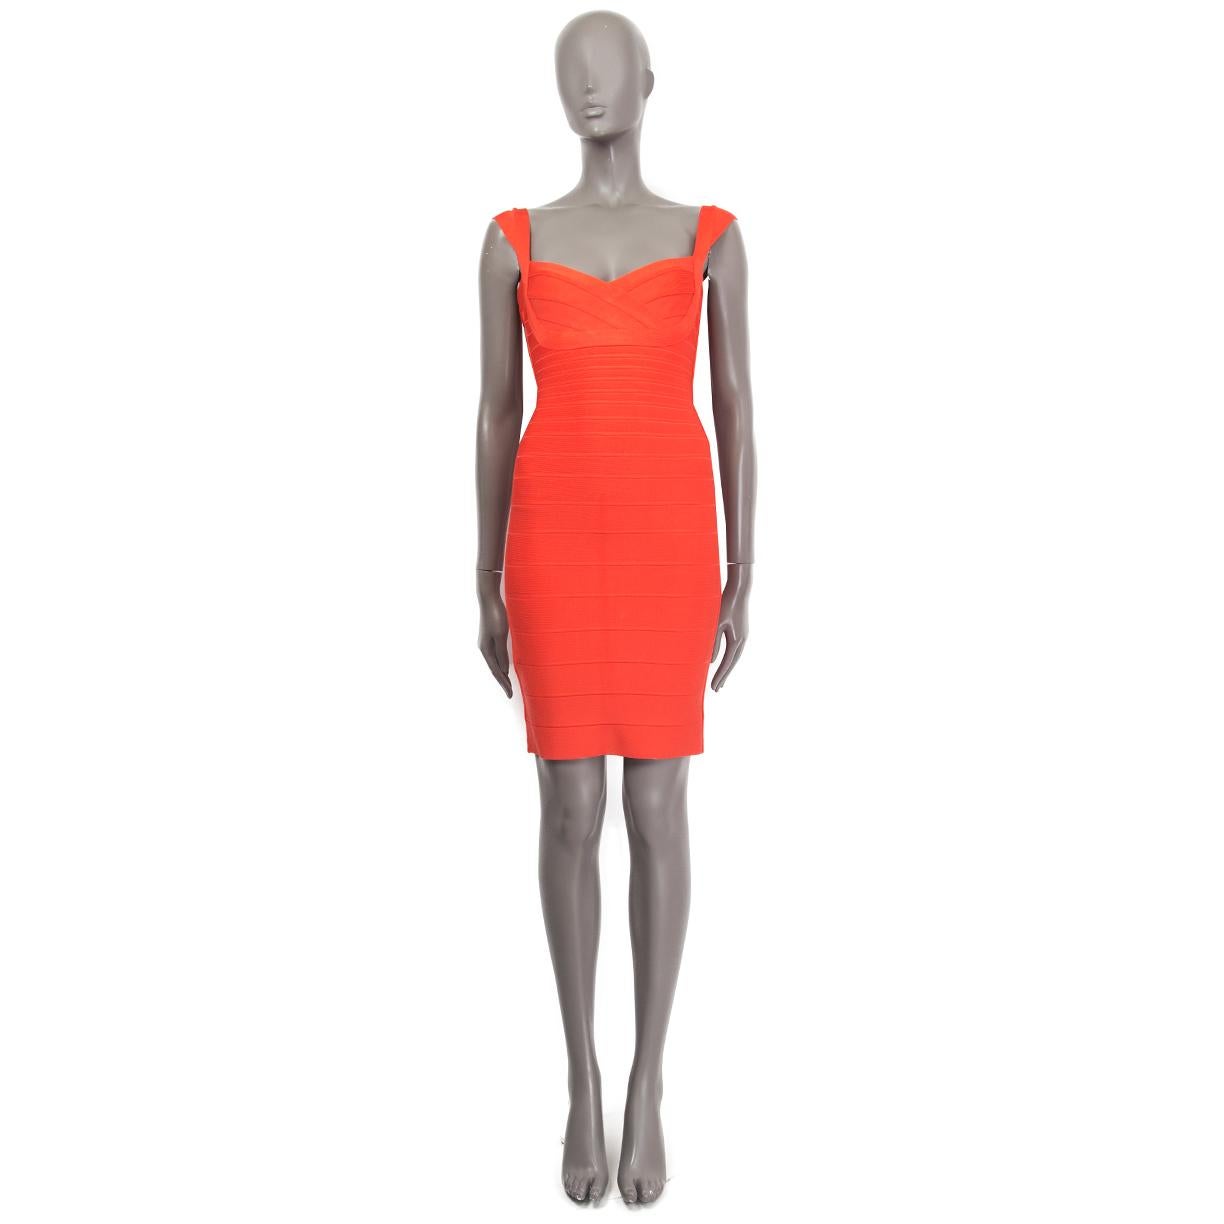 100% authentic Herve Leger 'Abrielle' bandage dress in coral red rayon (91%), nylon (8%) and spandex (1%). Opens with a zipper in the back. Unlined. Has been worn and is in excellent condition.

Measurements
Tag Size	S
Size	S
Bust	80cm (31.2in) to